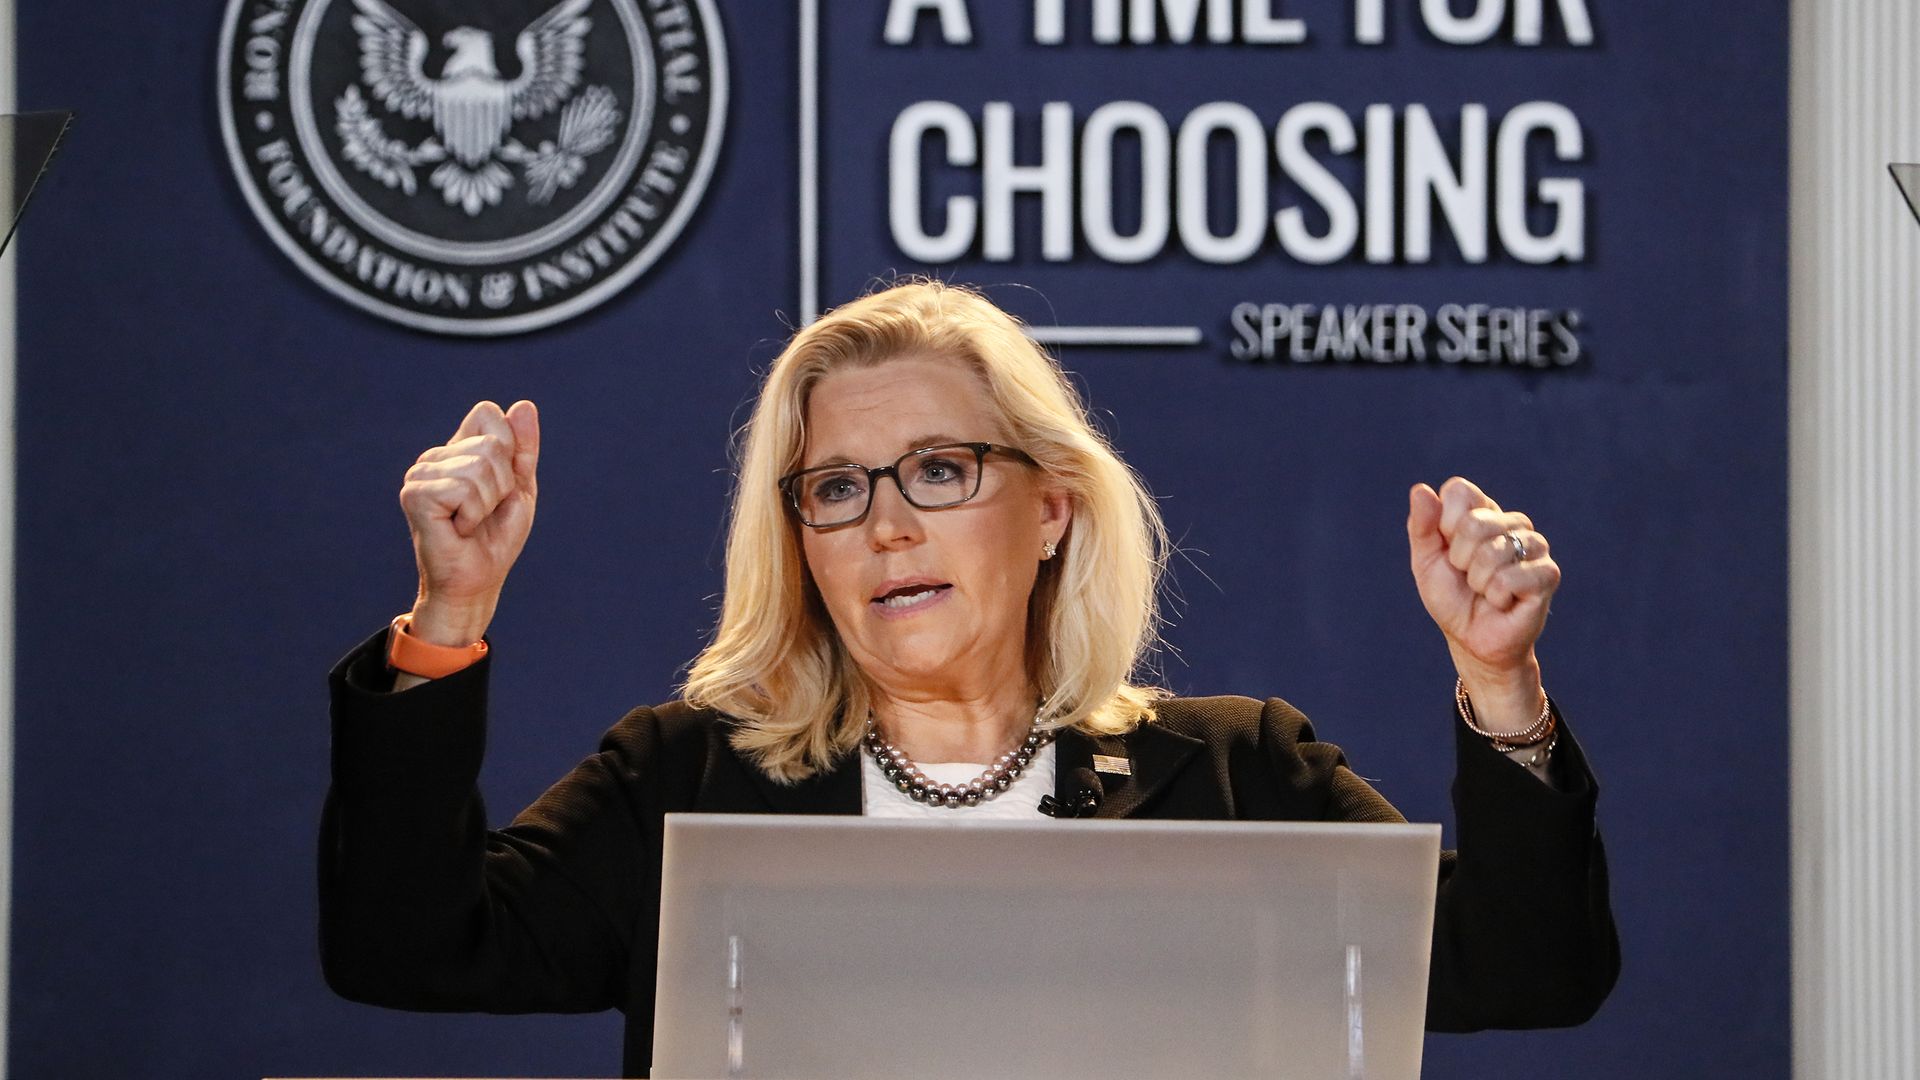 Rep. Liz Cheney (R-Wyo.) wearing a black blazer, white shirt and glasses, raises her arms during a speech at the Ronald Reagan Presidential Foundation & Institute.